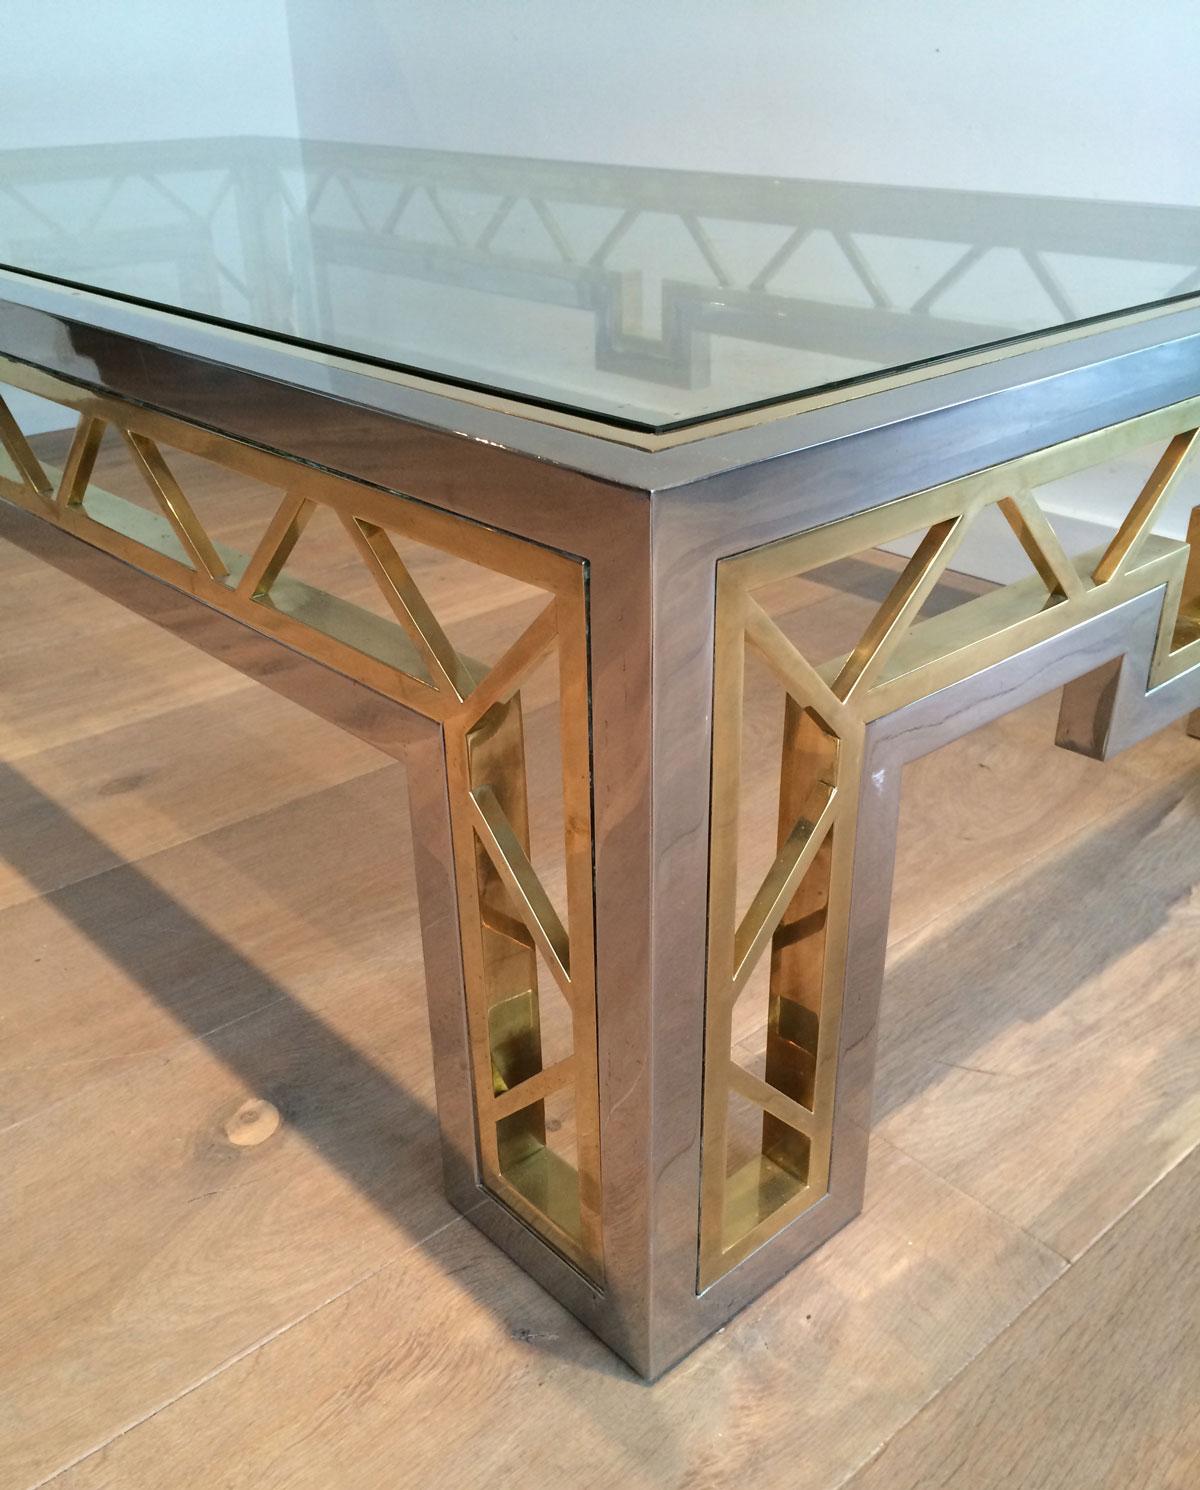 Exceptional Rare Large Chrome and Brass Coffee Table, French, circa 1970 For Sale 6